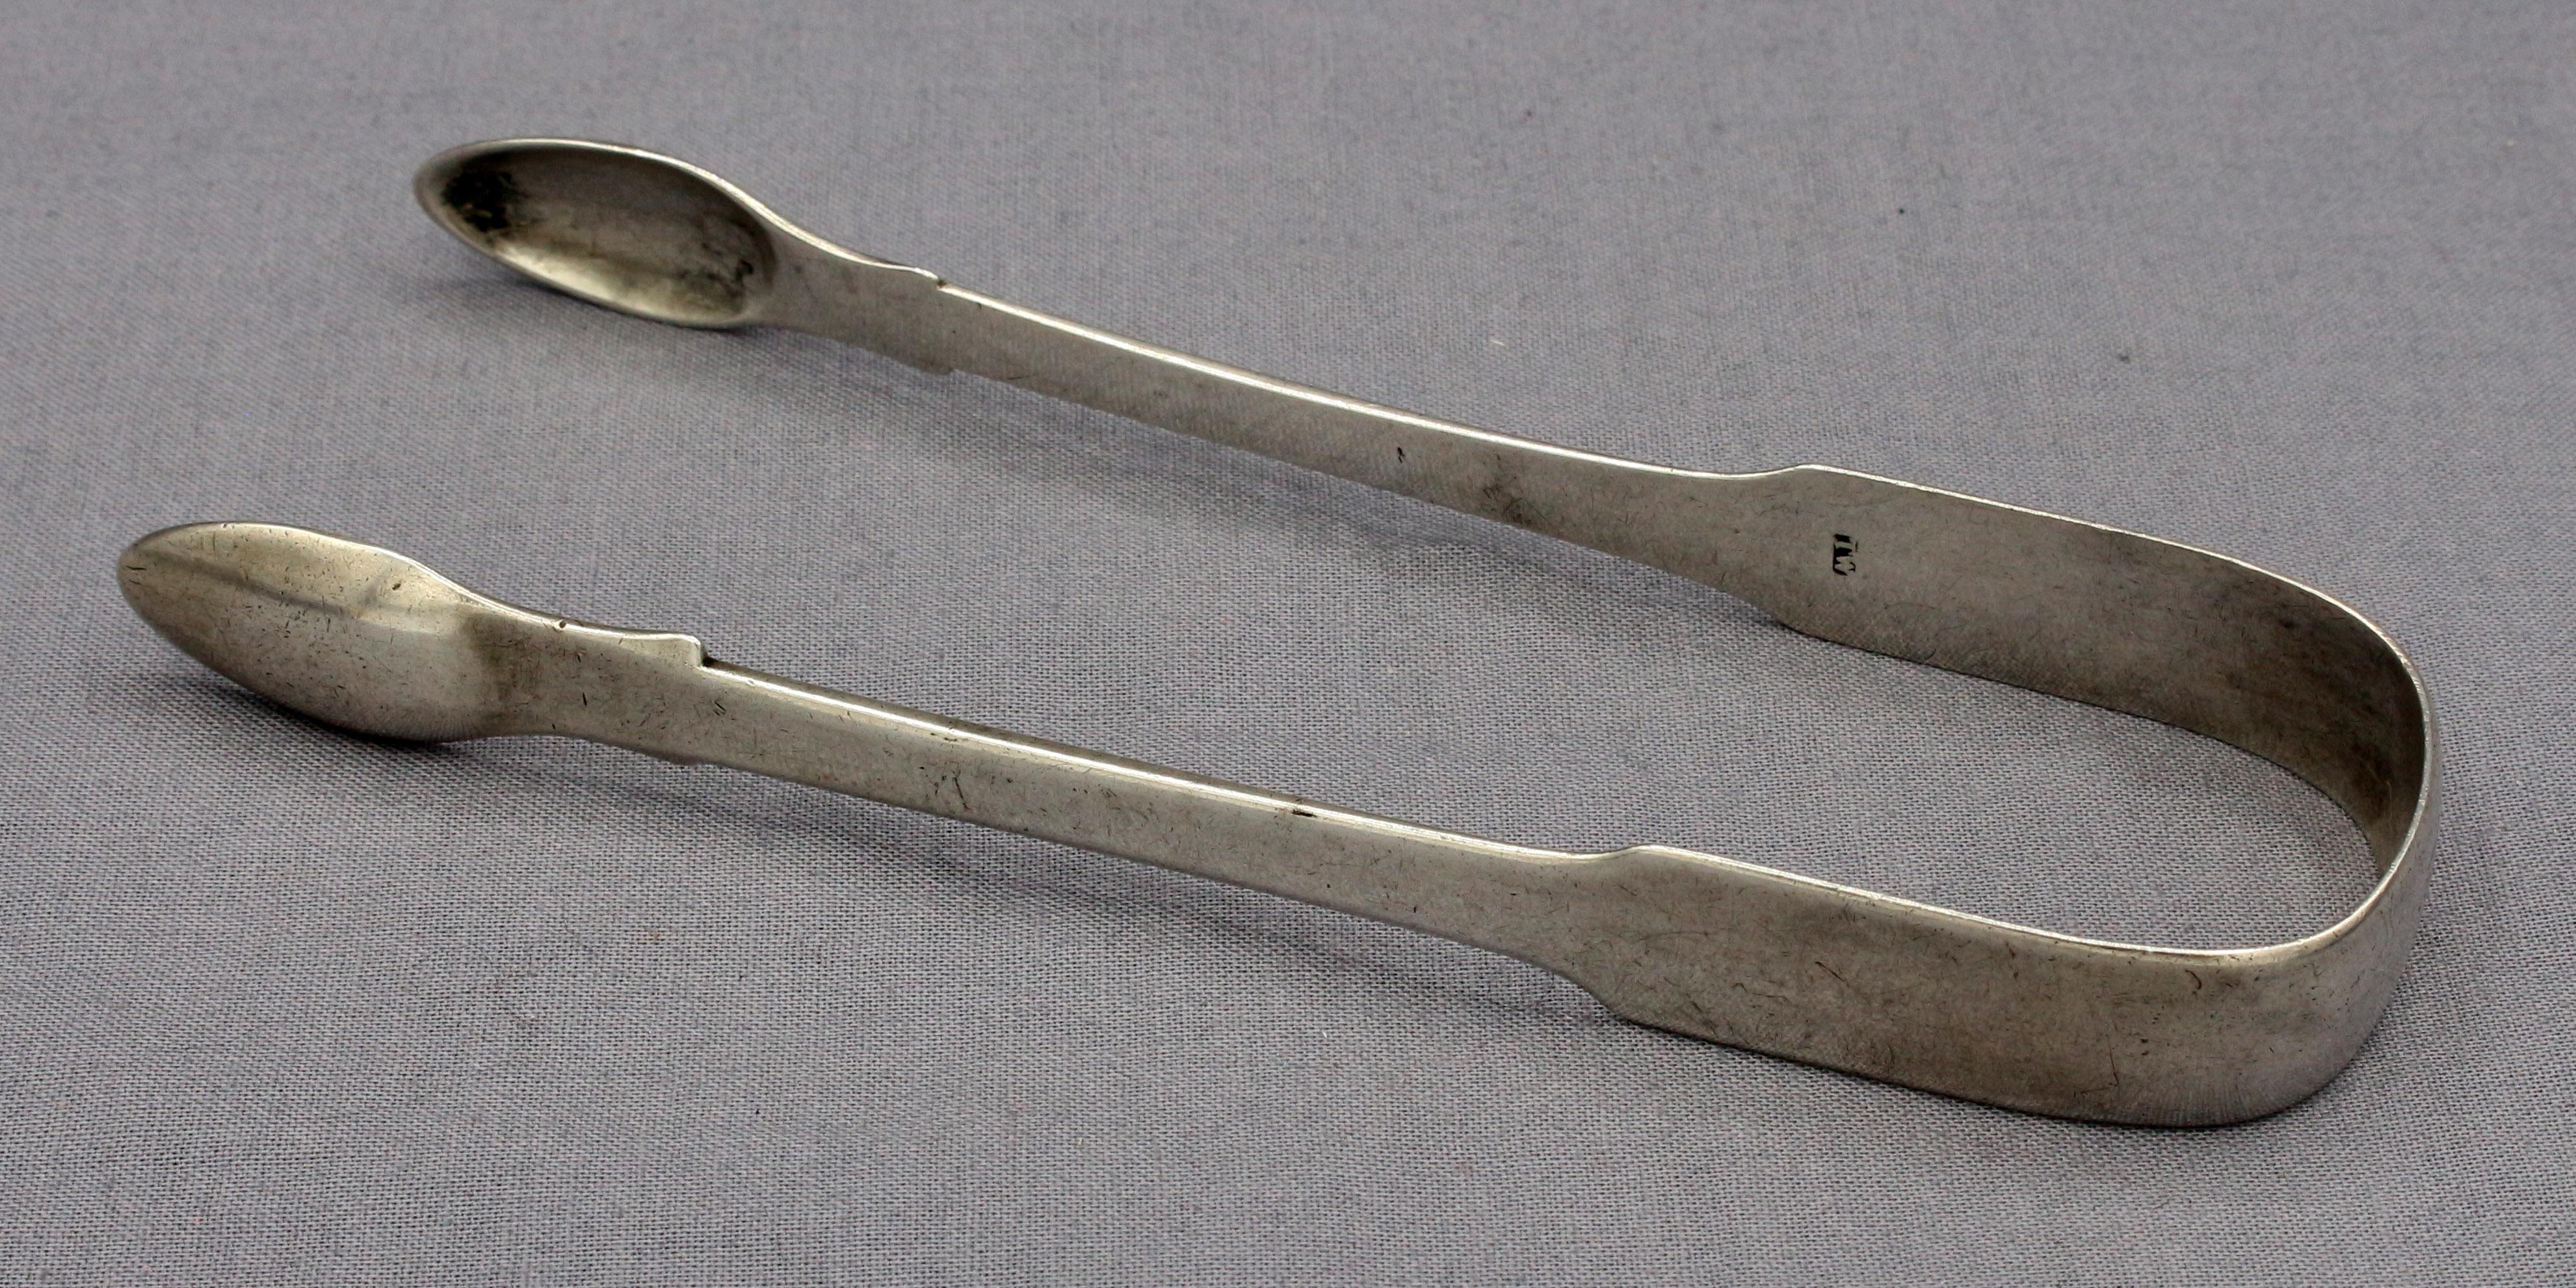 An 1815 pair of sugar tongs, sterling silver, Newcastle, by Thomas Watson one of the city's most prolific silversmiths. Crest of 13 families, Fairbairn pg.98, #14, a ducal coronet, martlet. 1.40 troy oz.
5 1/2